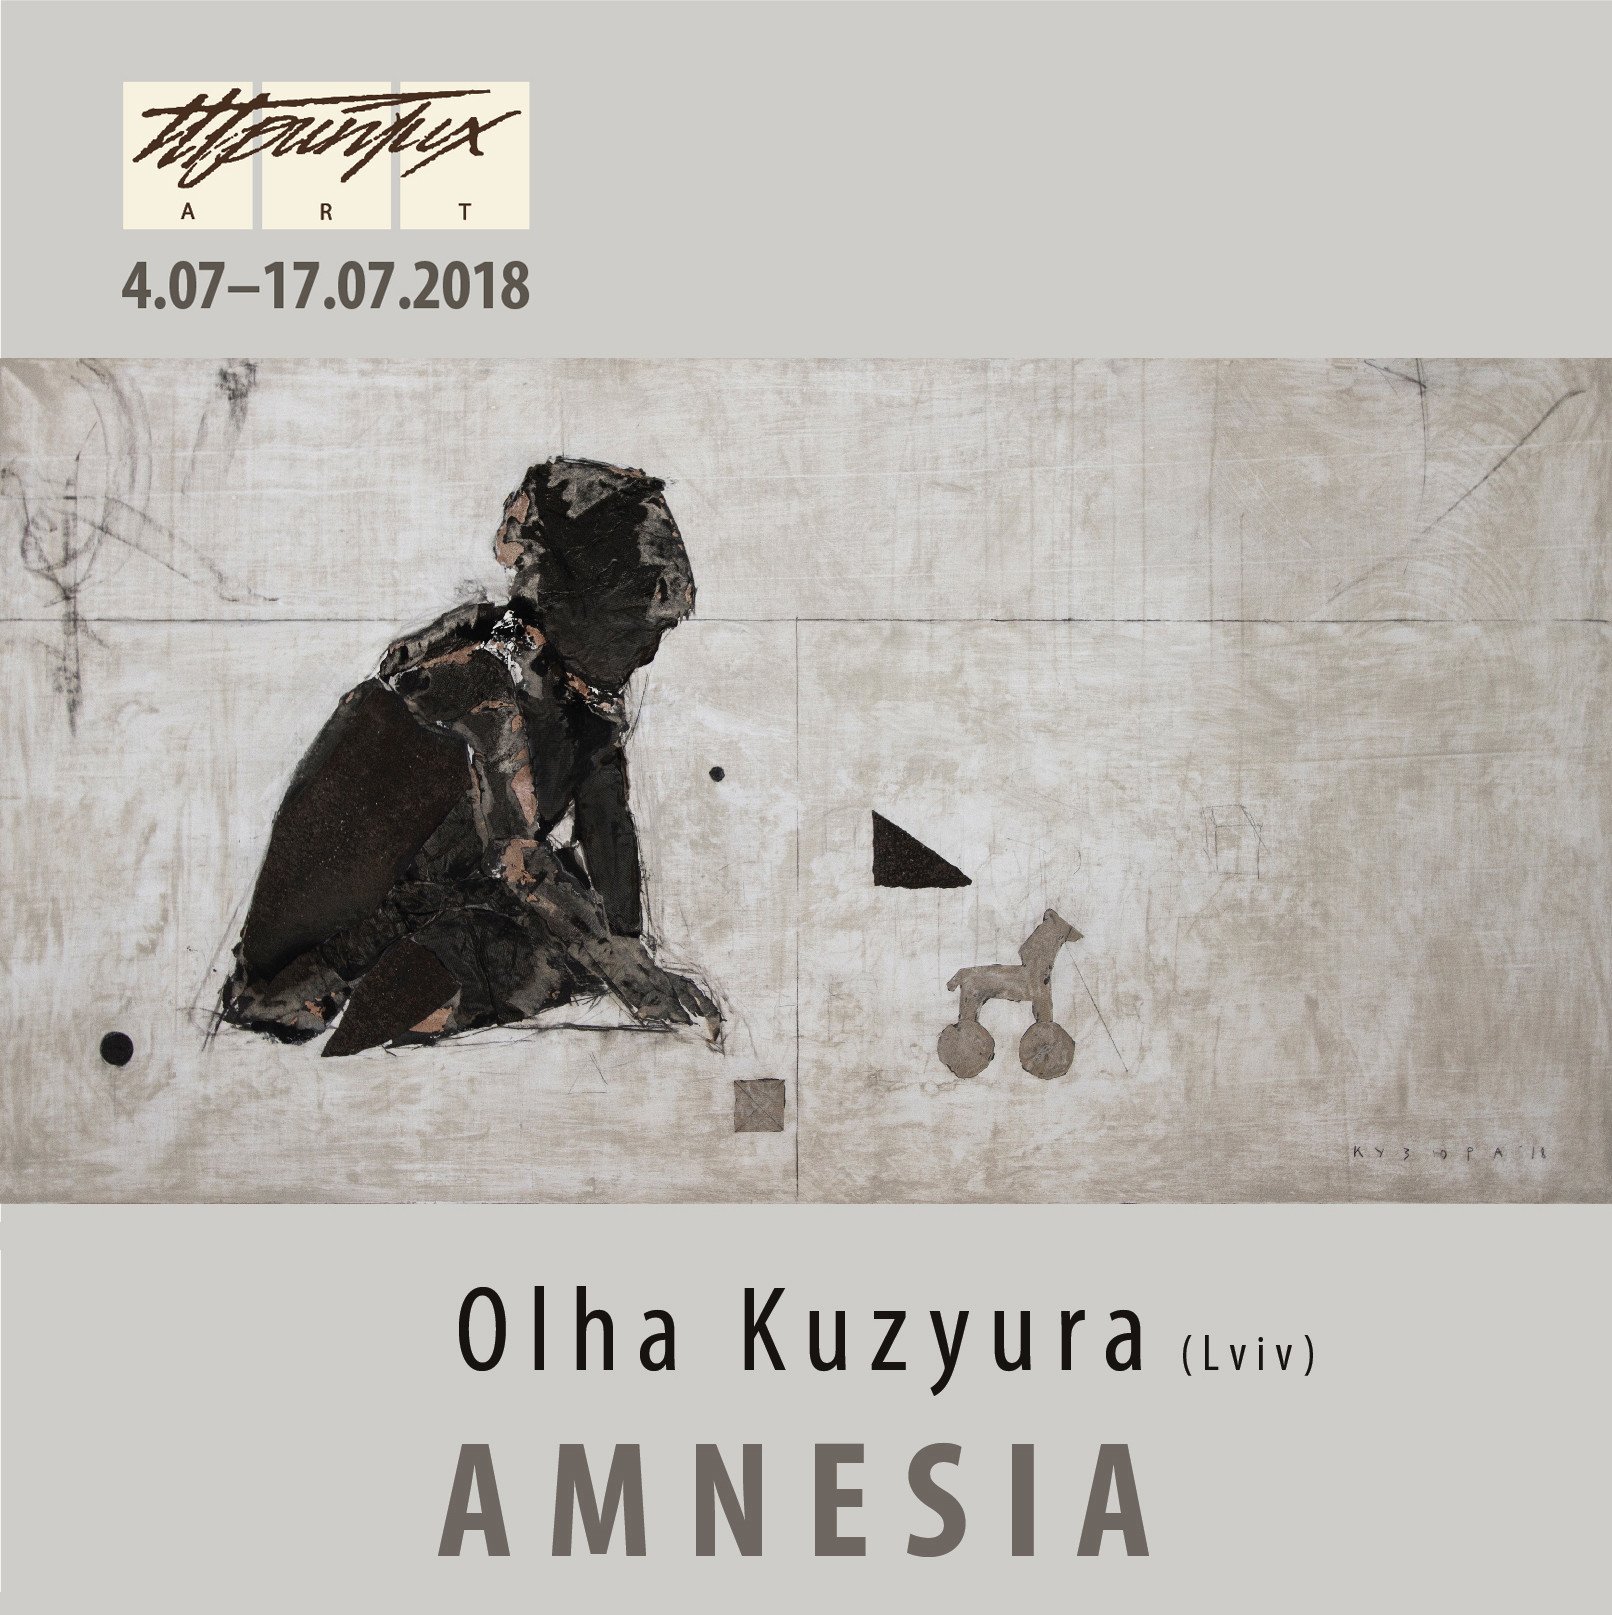 soon The opening of the "Amnesia" project in the Triptych Art Gallery 